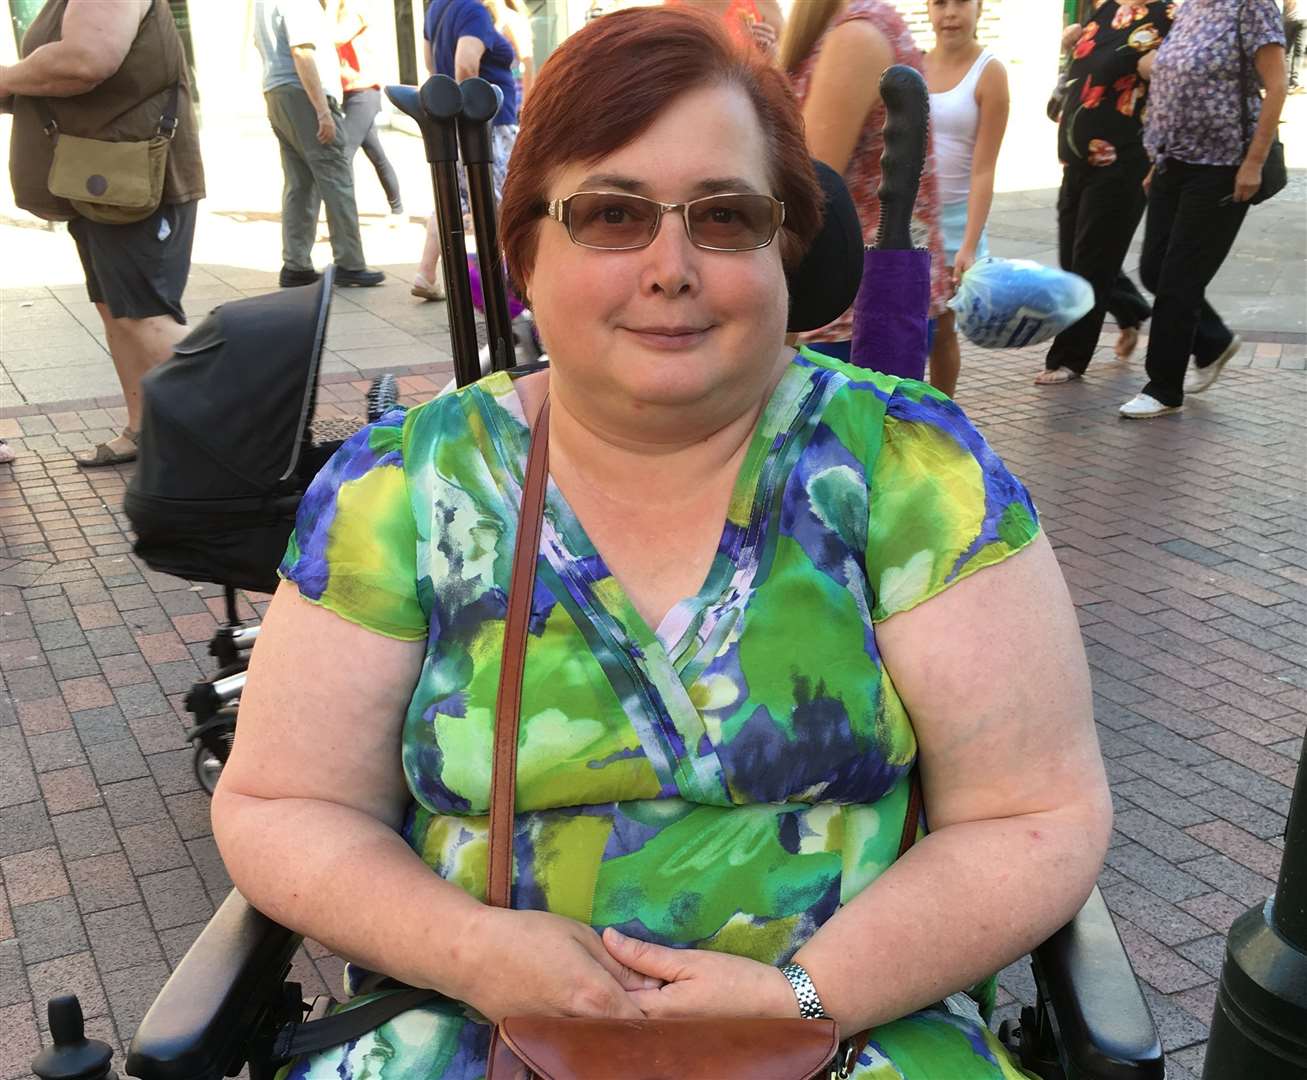 Disability rights campaigner Sue Groves